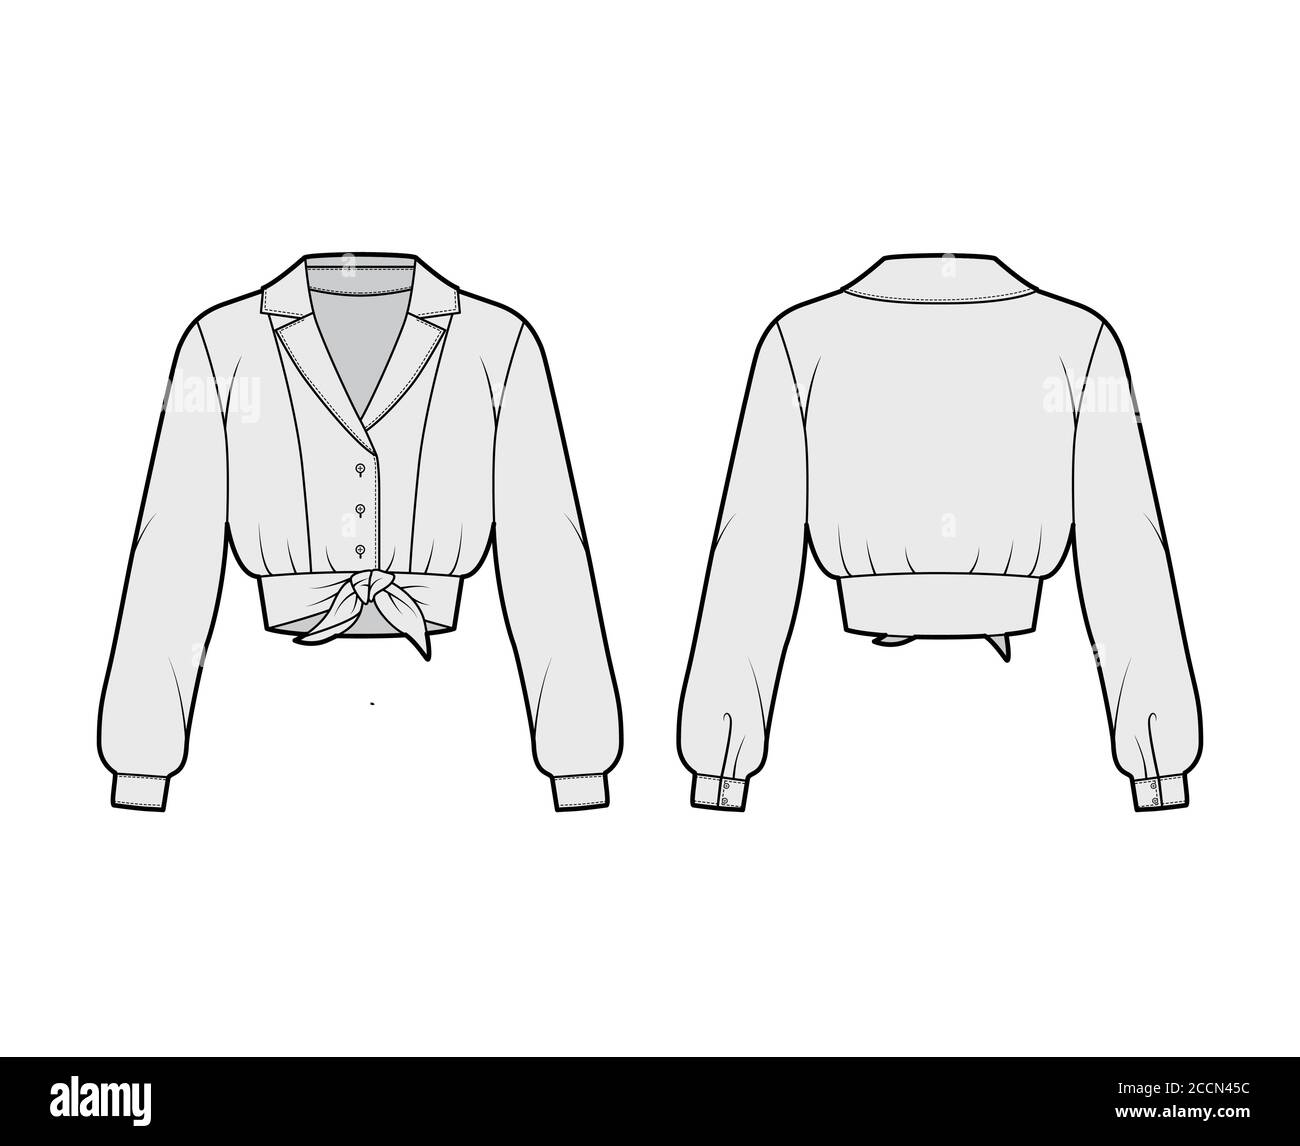 Tie-front cropped shirt technical fashion illustration with camp collar ...